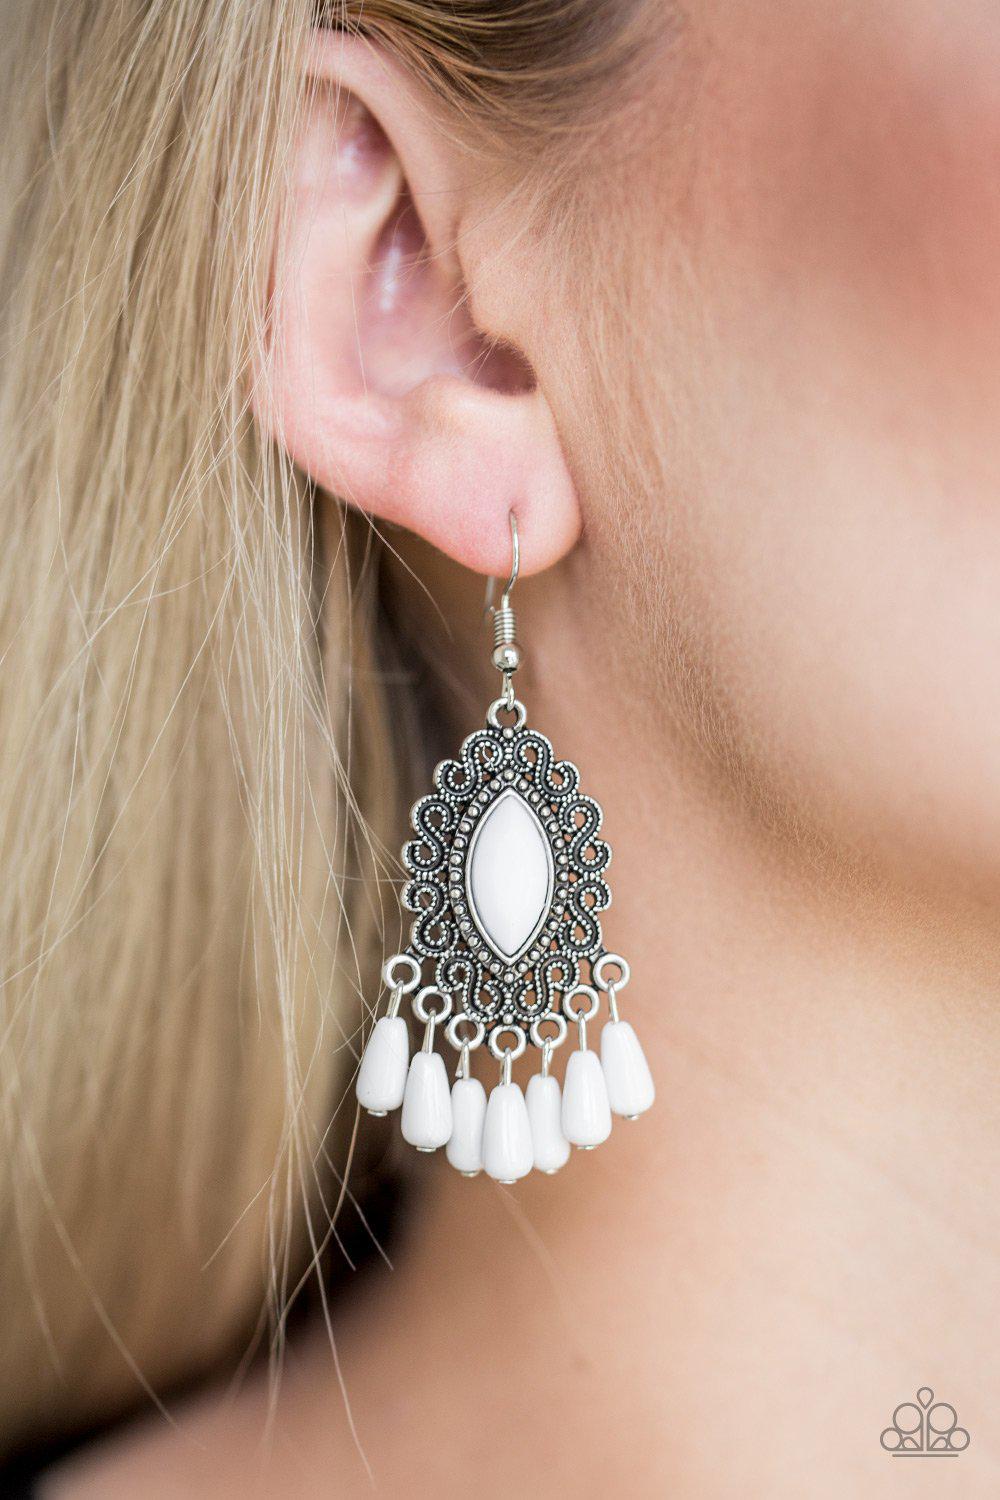 Private Villa White Earrings - Paparazzi Accessories - model -CarasShop.com - $5 Jewelry by Cara Jewels